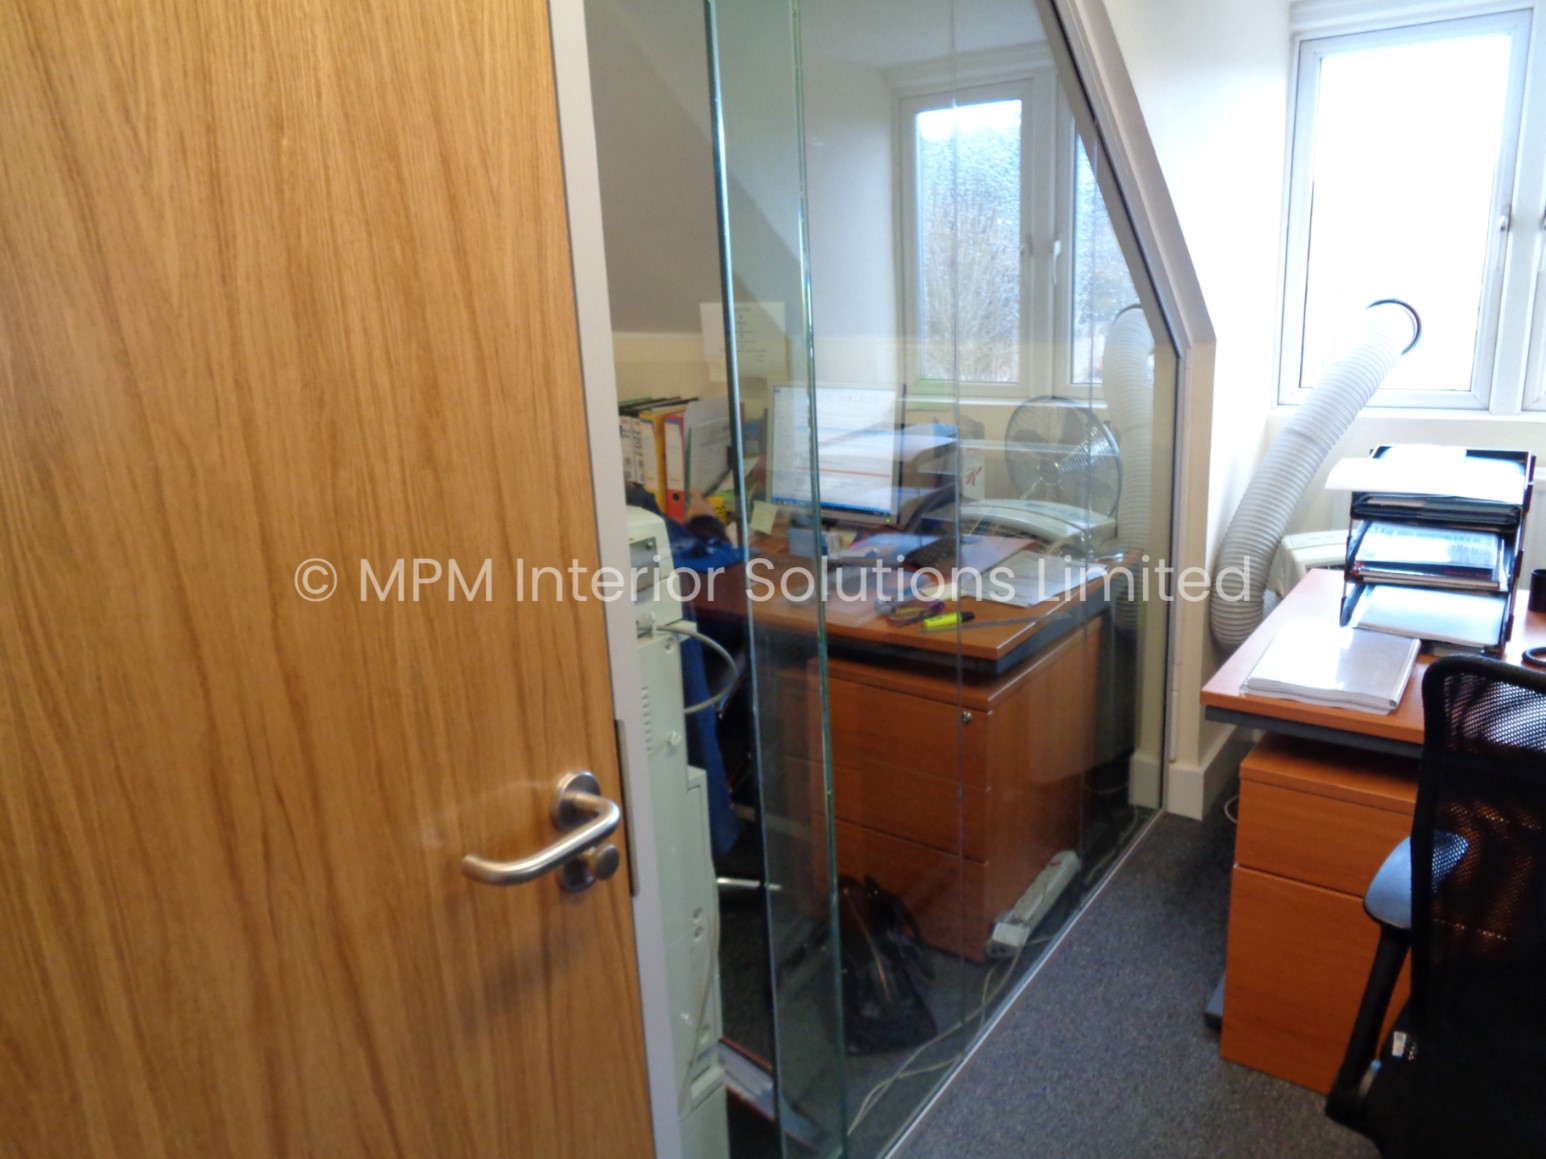 Frameless Glass Office Partitioning, Survery Roofing Group Ltd (Whyteleafe, Surrey), MPM Interior Solutions Limited